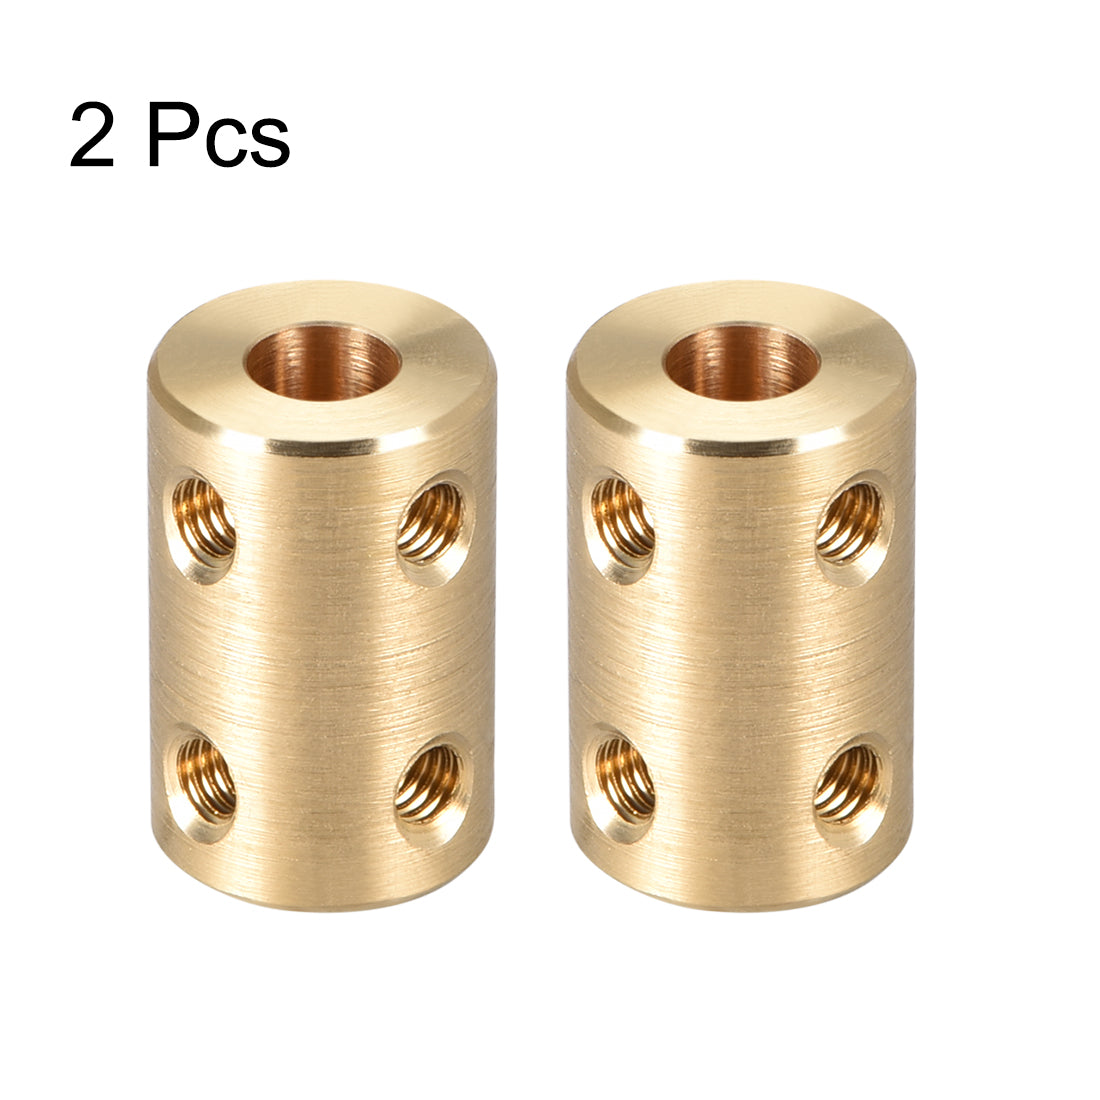 uxcell Uxcell Shaft Coupling 6mm to 6mm Bore L22xD14 Robot Motor Wheel Rigid Coupler Connector Gold Tone 2 Pcs